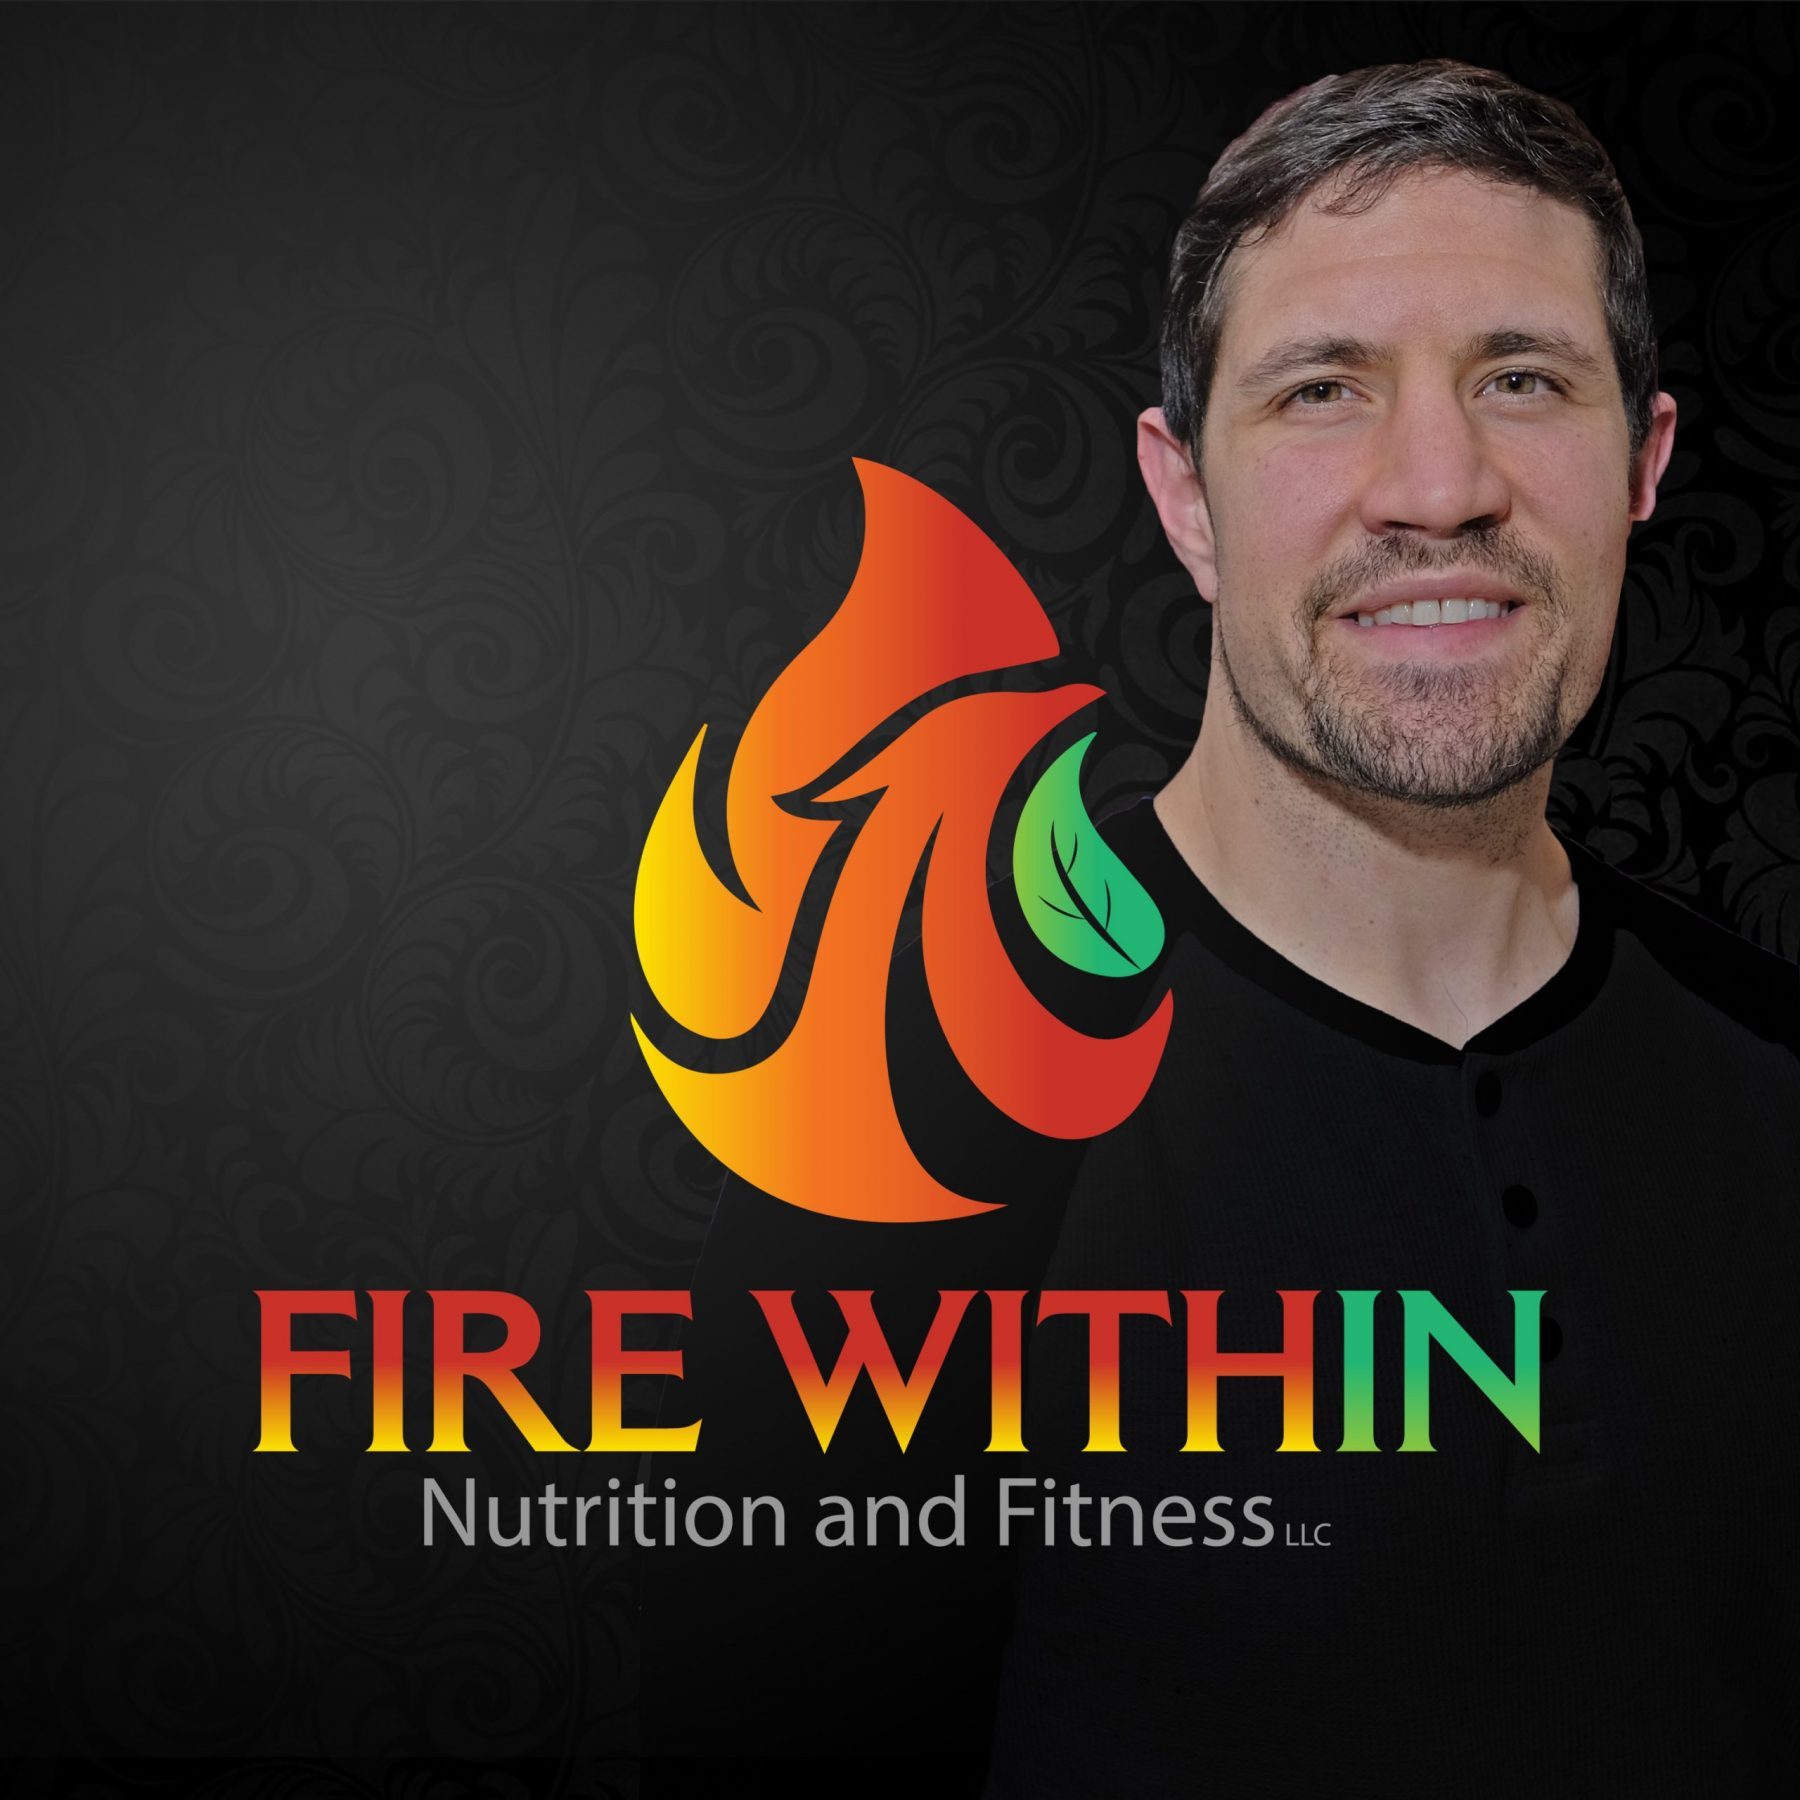 Personal Trainer in Cary NC Fire Within Brandon Woolley